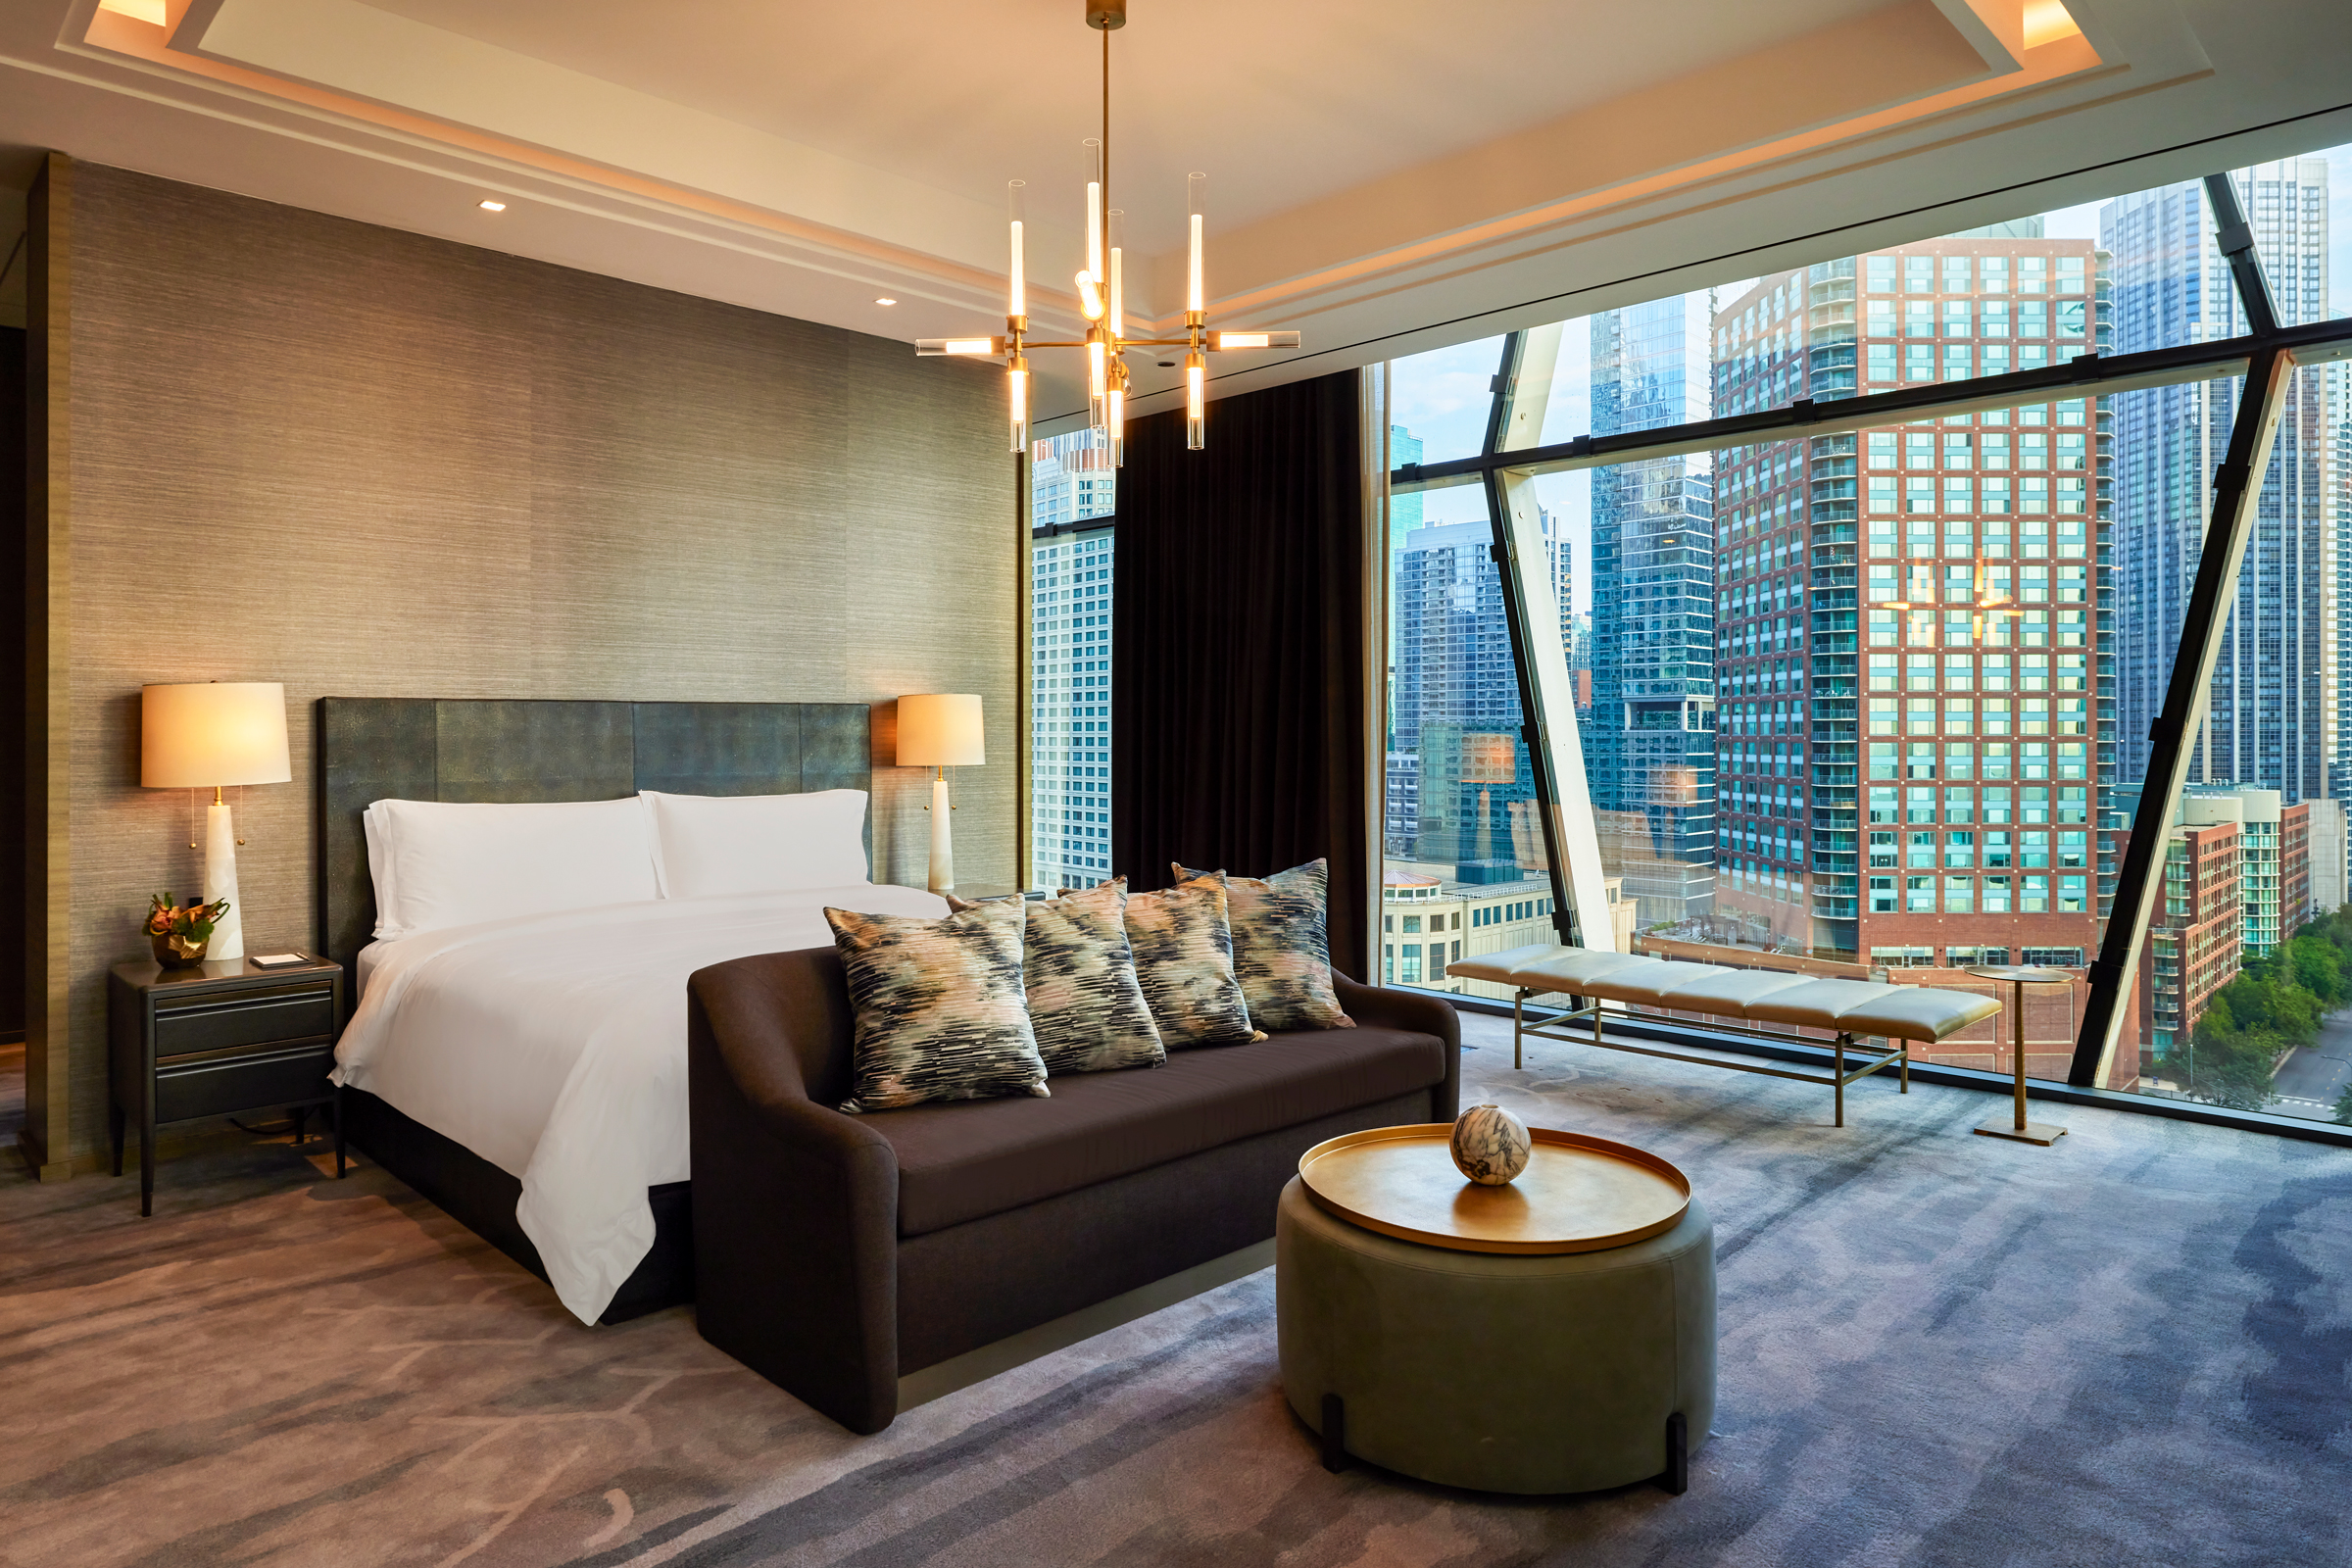 How Sustainable Strategies Guided the St. Regis Chicago Design